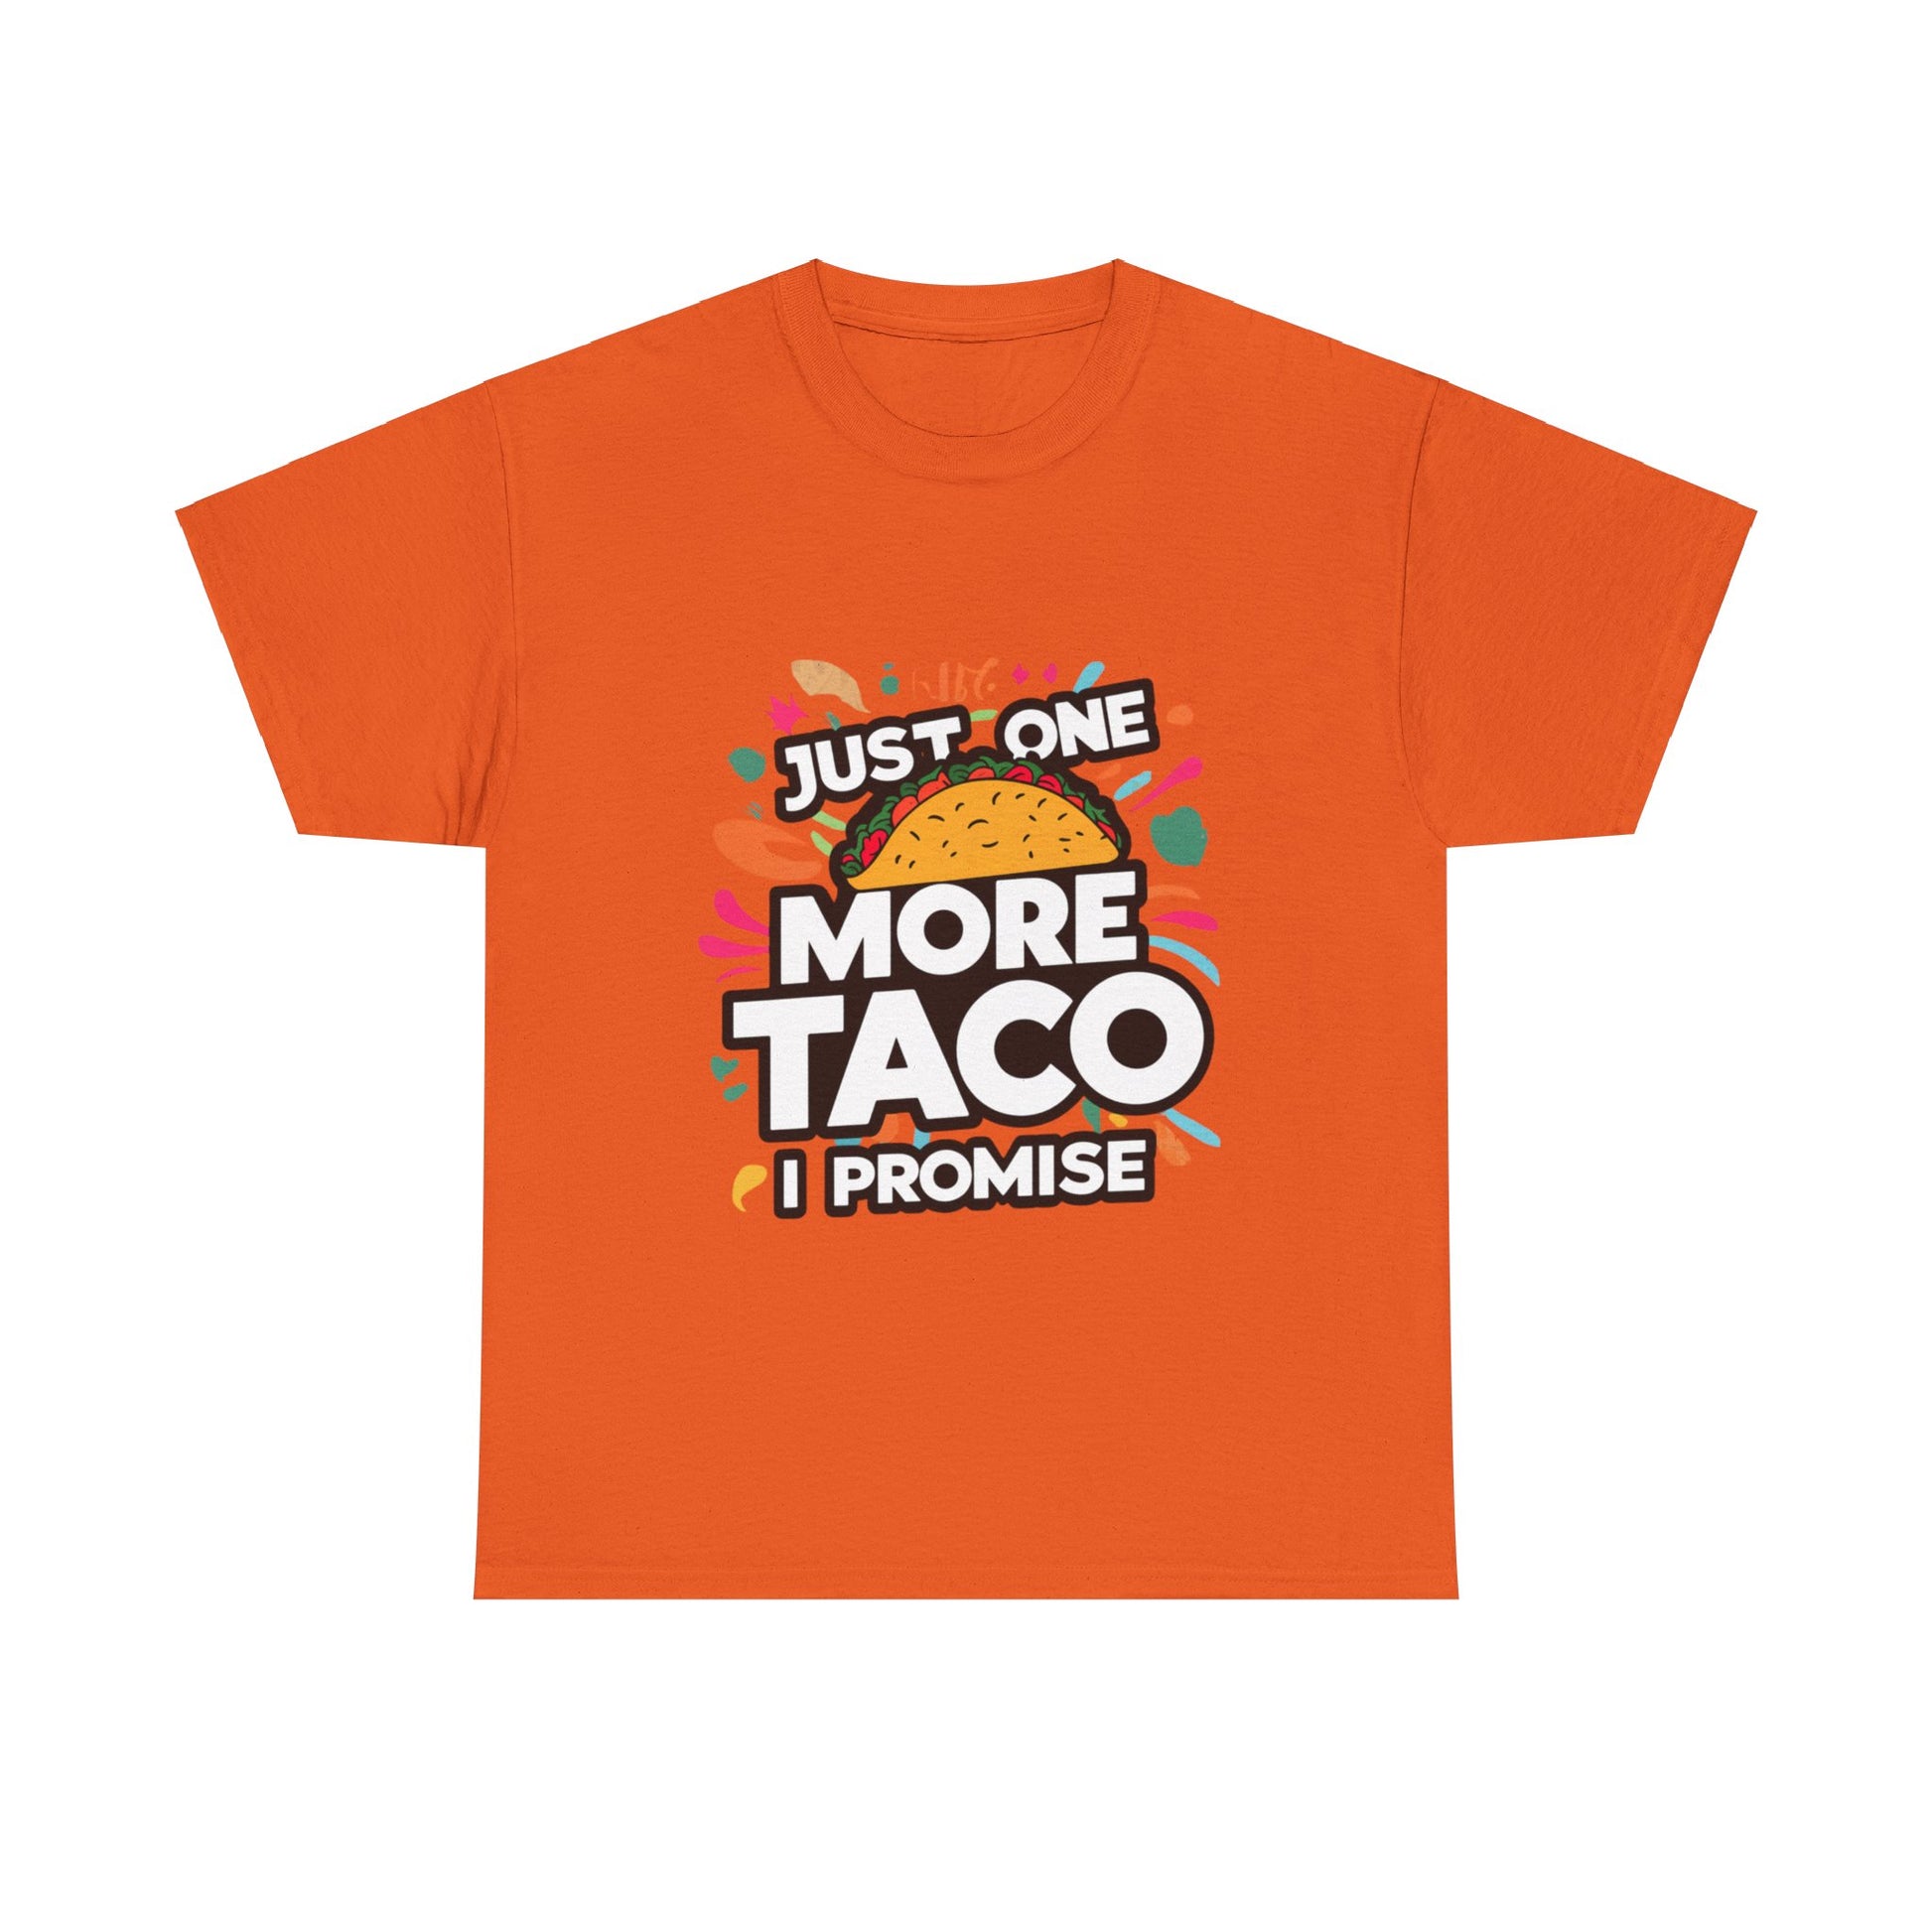 Just One More Taco I Promise Mexican Food Graphic Unisex Heavy Cotton Tee Cotton Funny Humorous Graphic Soft Premium Unisex Men Women Orange T-shirt Birthday Gift-6